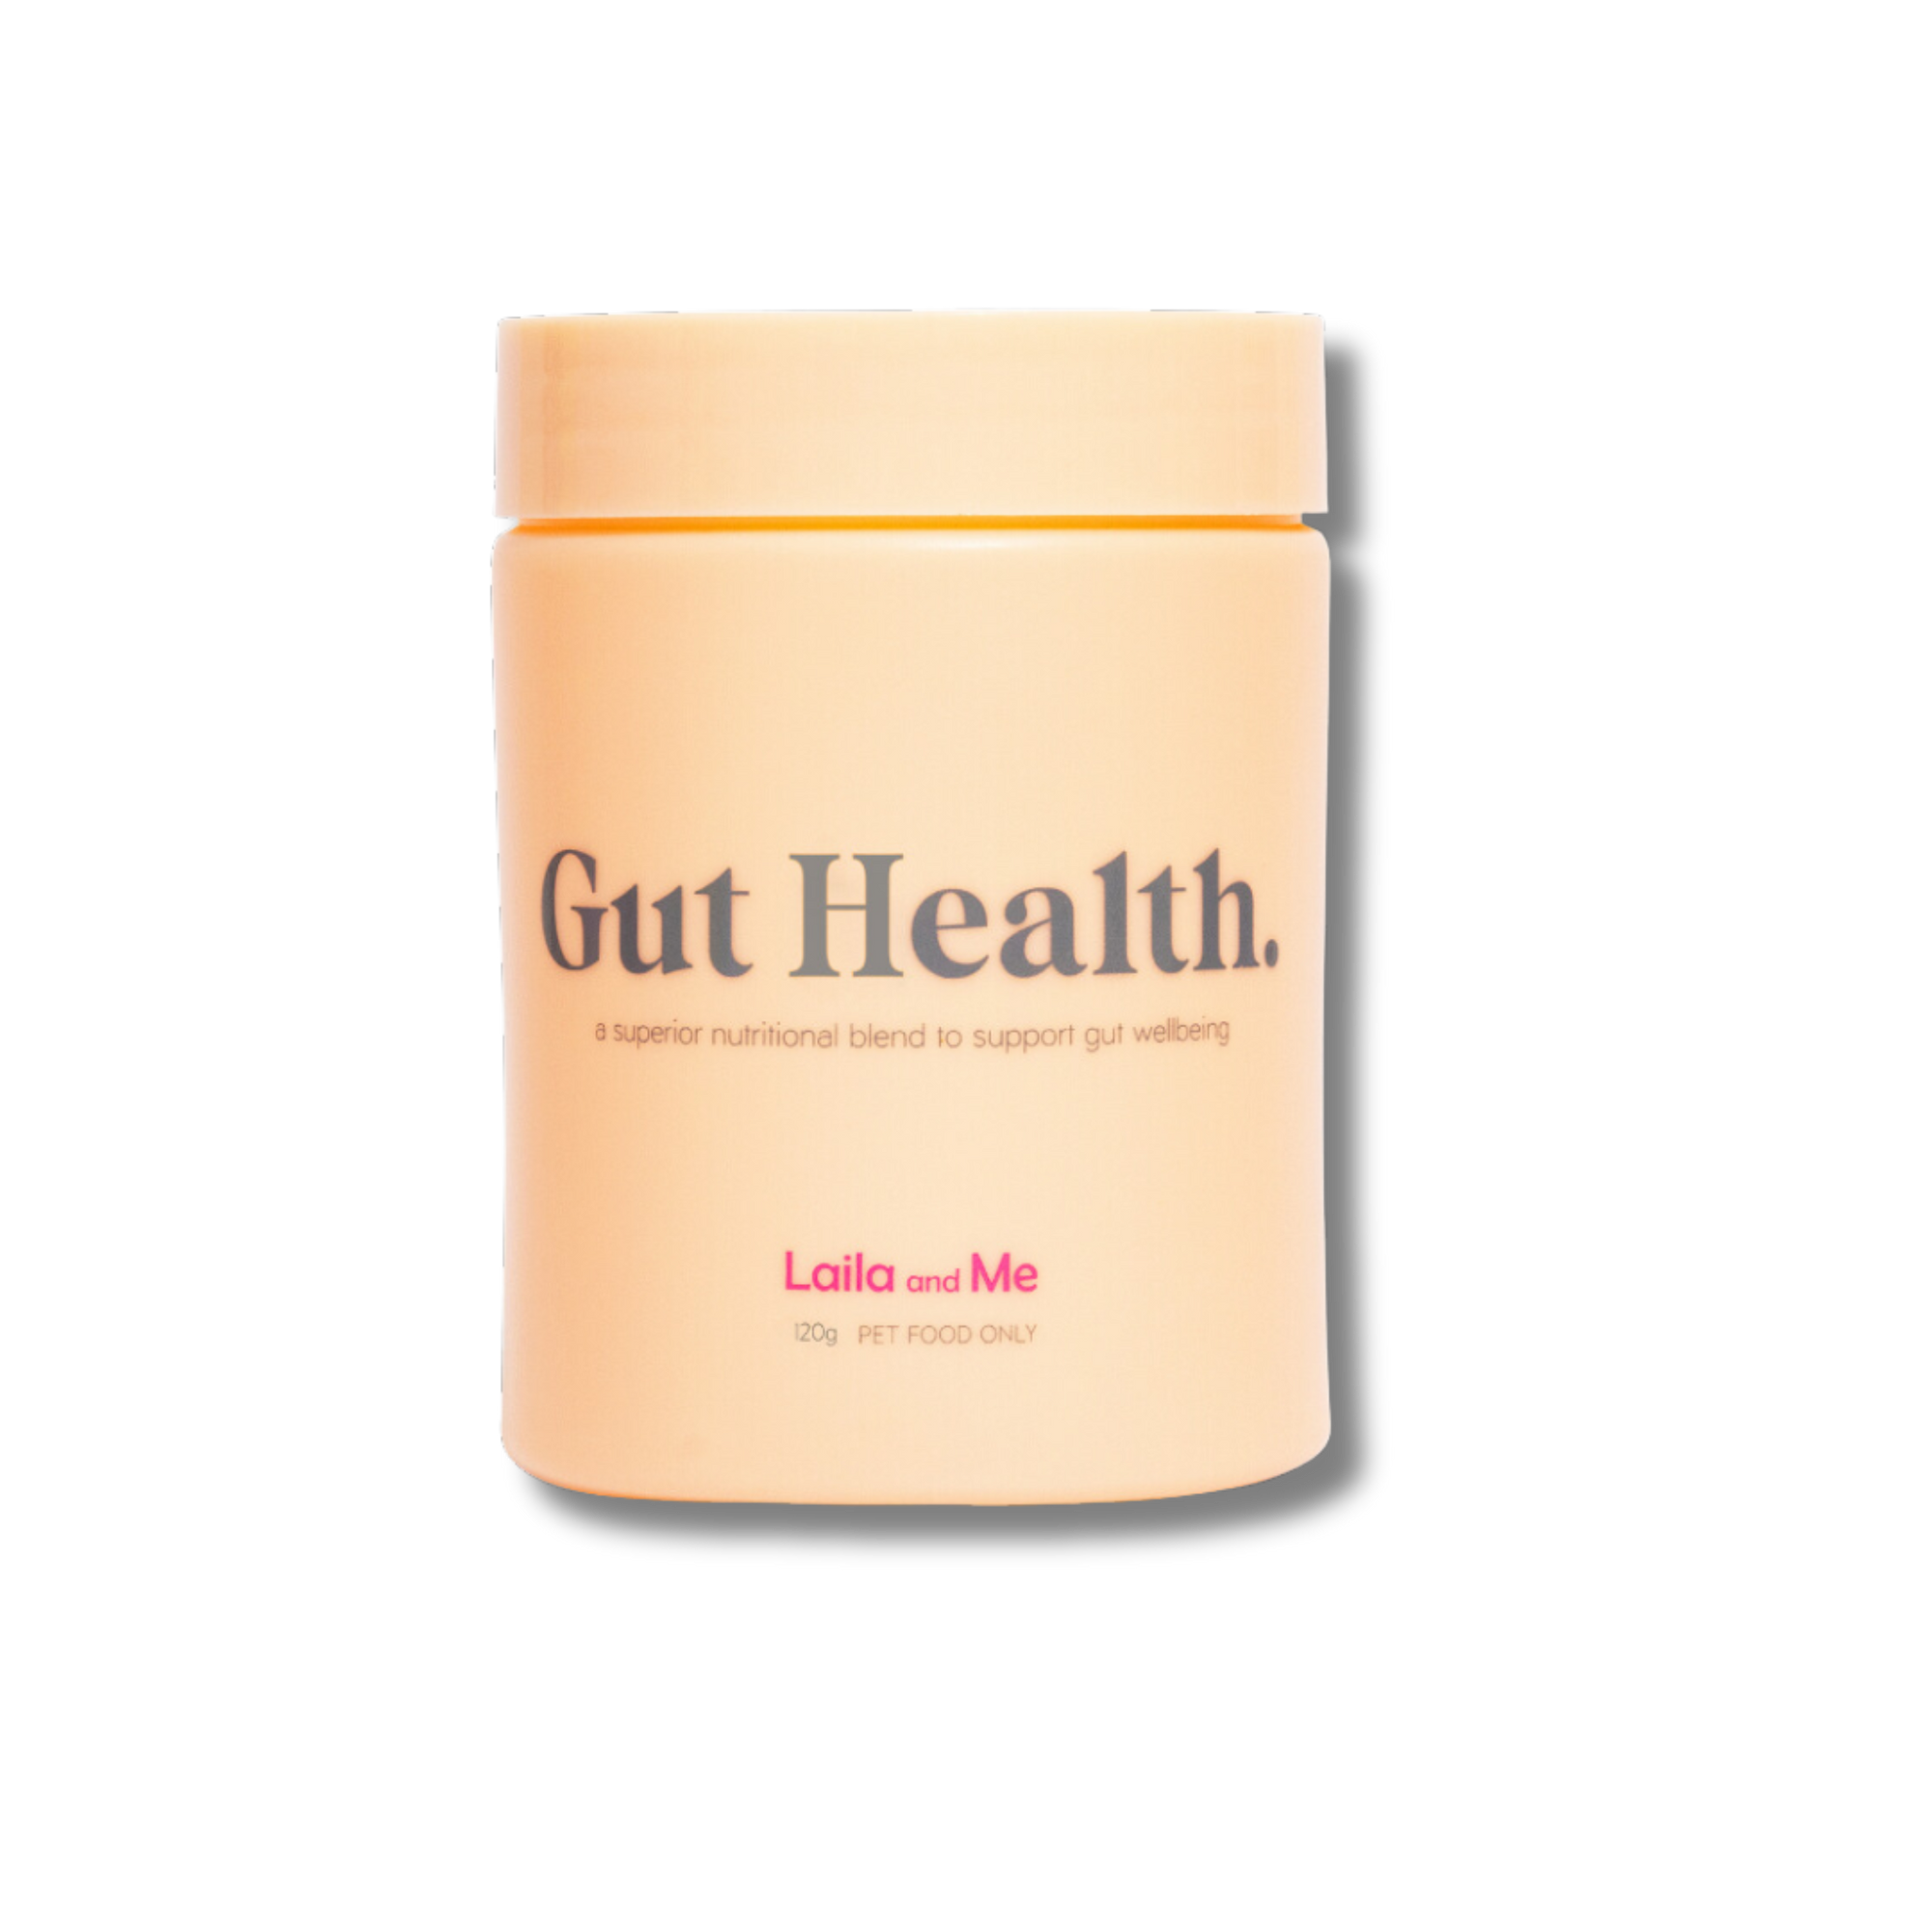 gut health dog supplement - laila and me